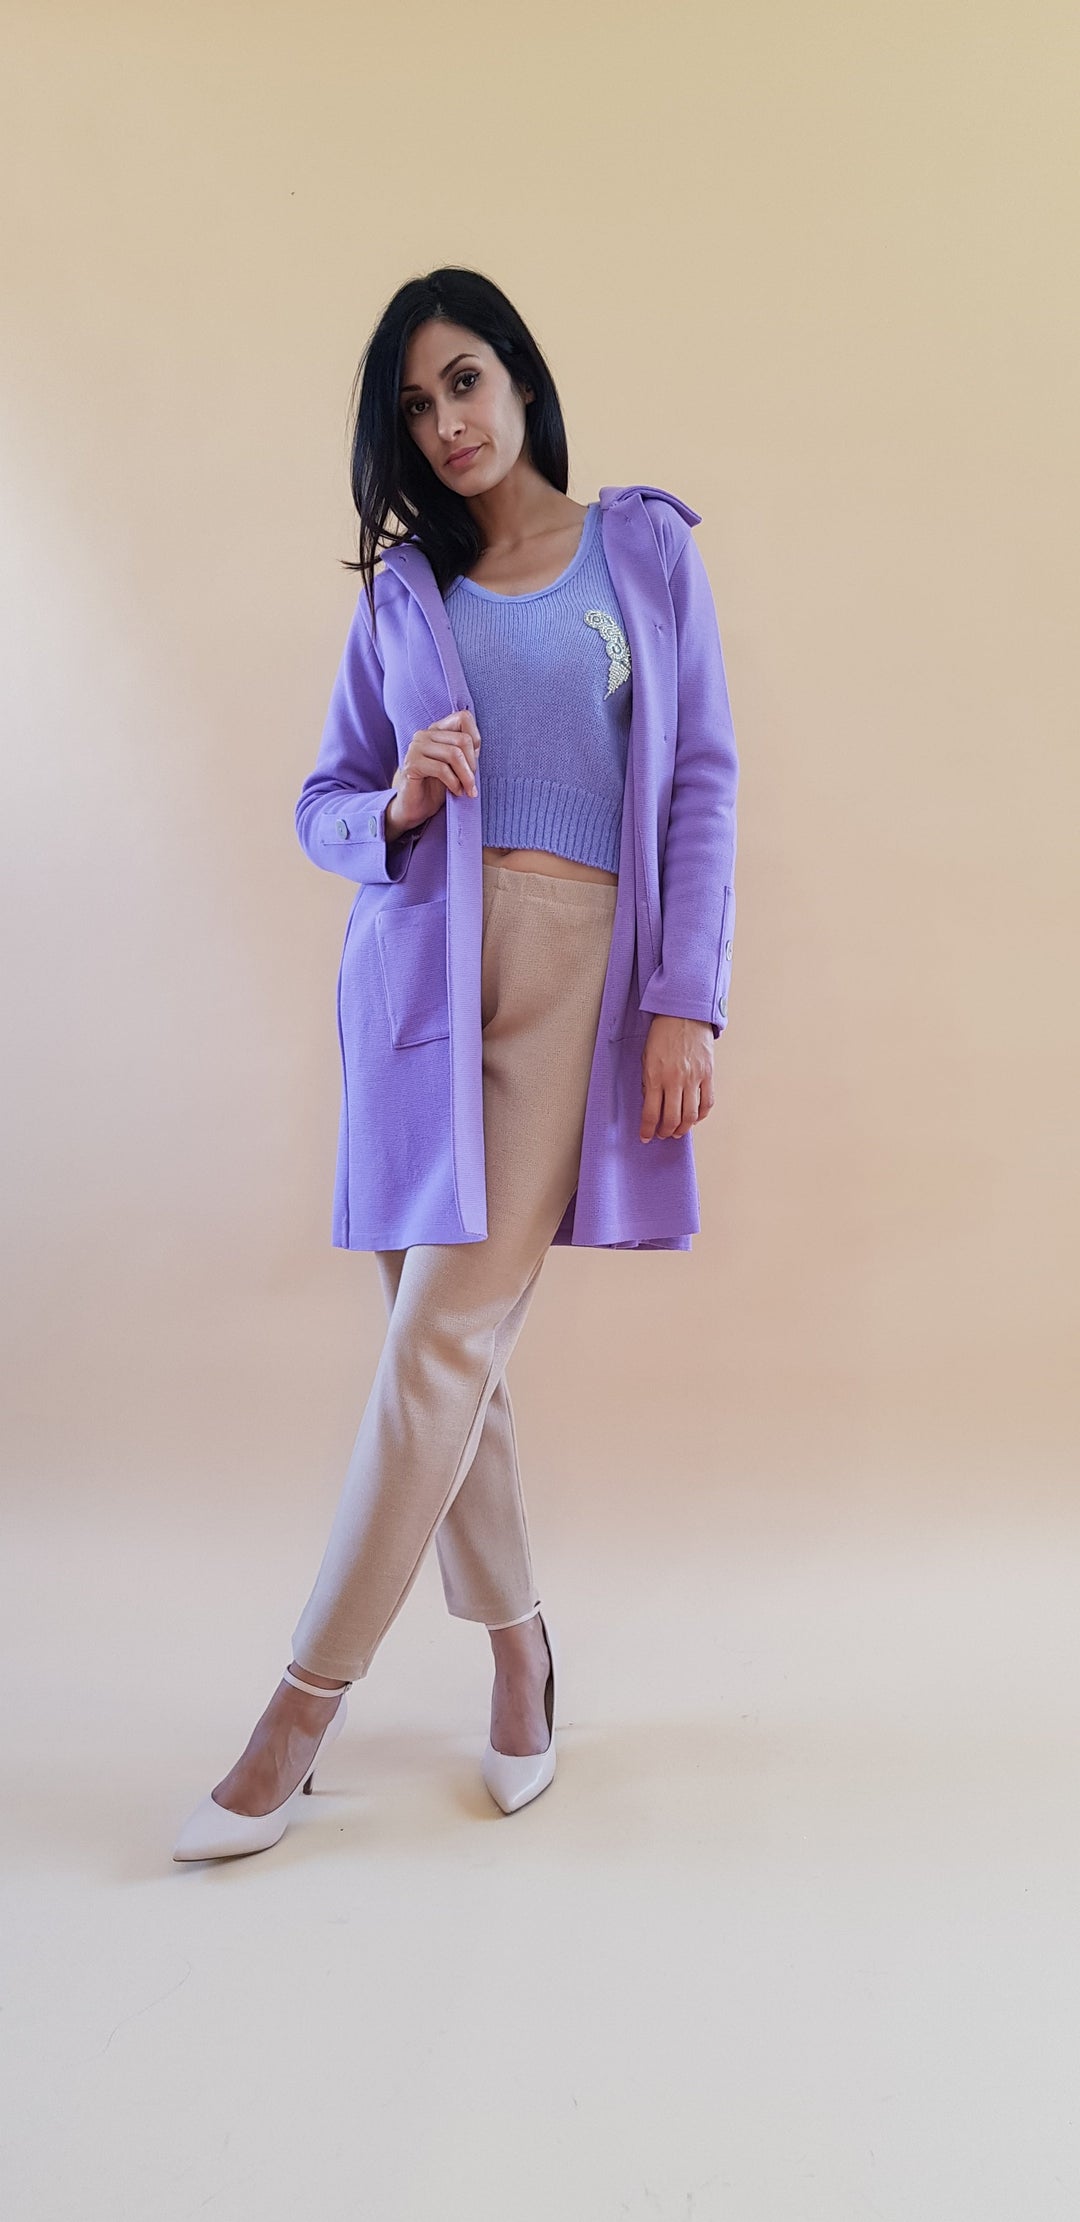 Woman wearing a purple coat with beige pants against a neutral background